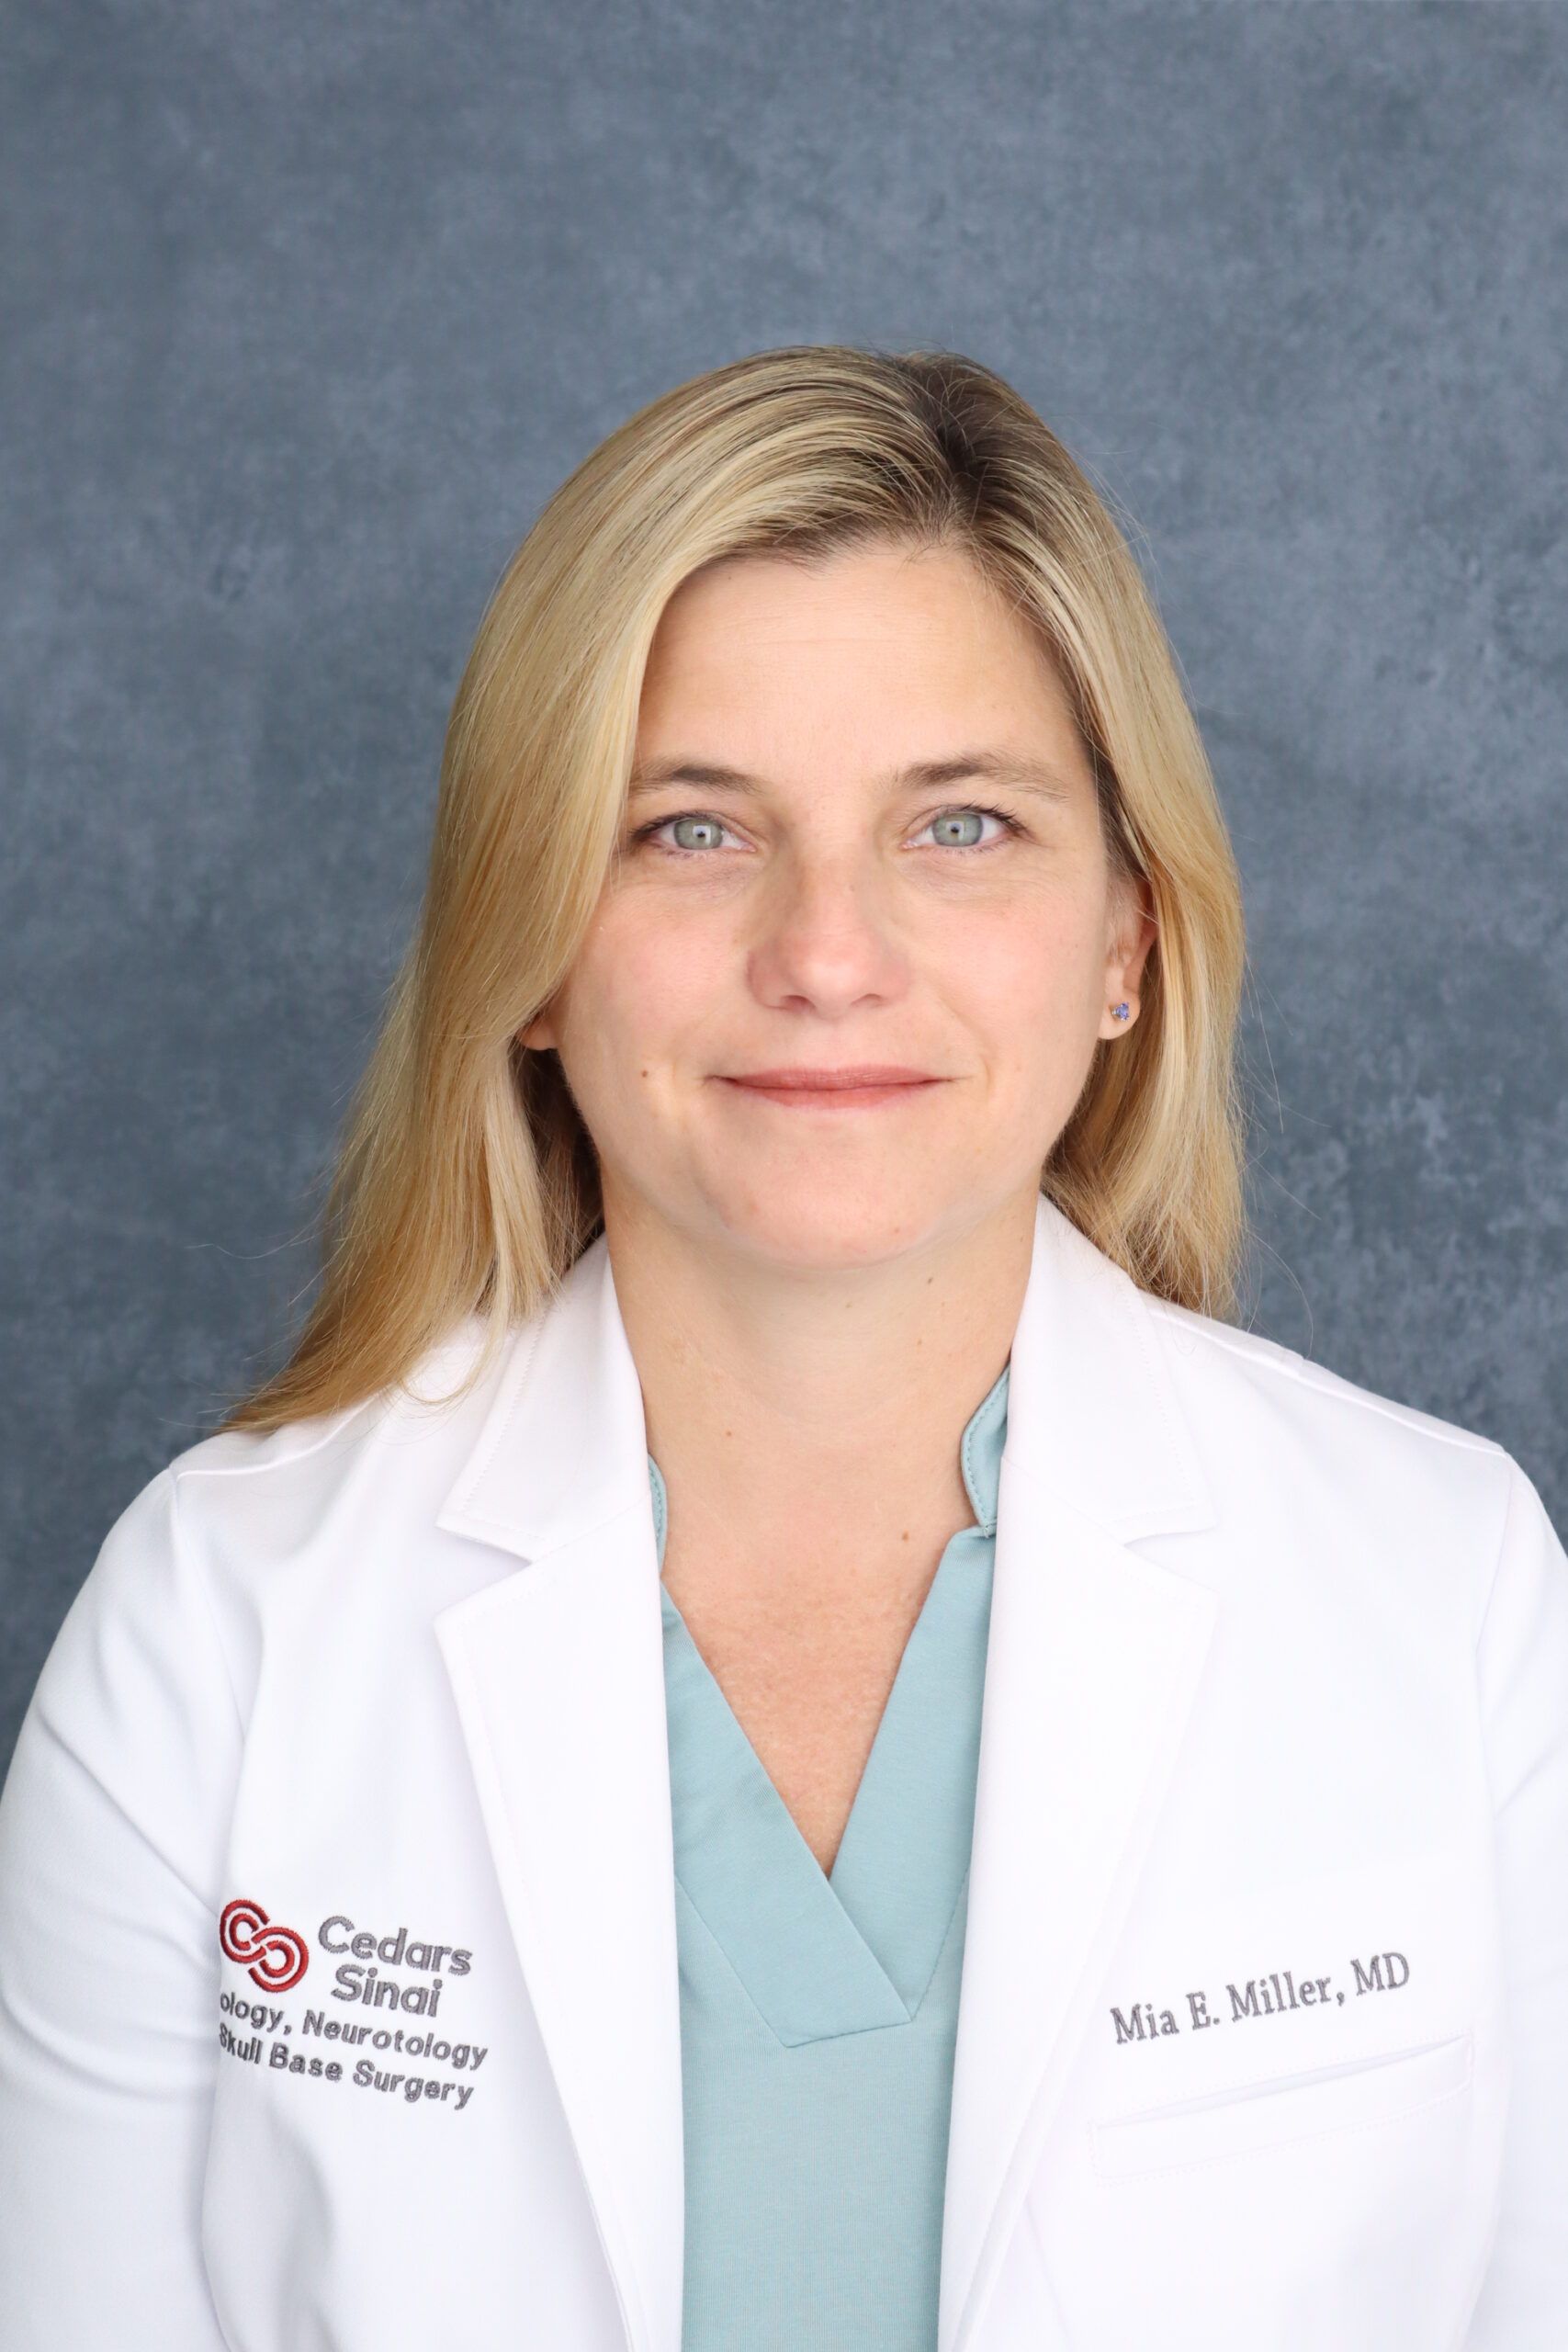 Mia Miller, MD